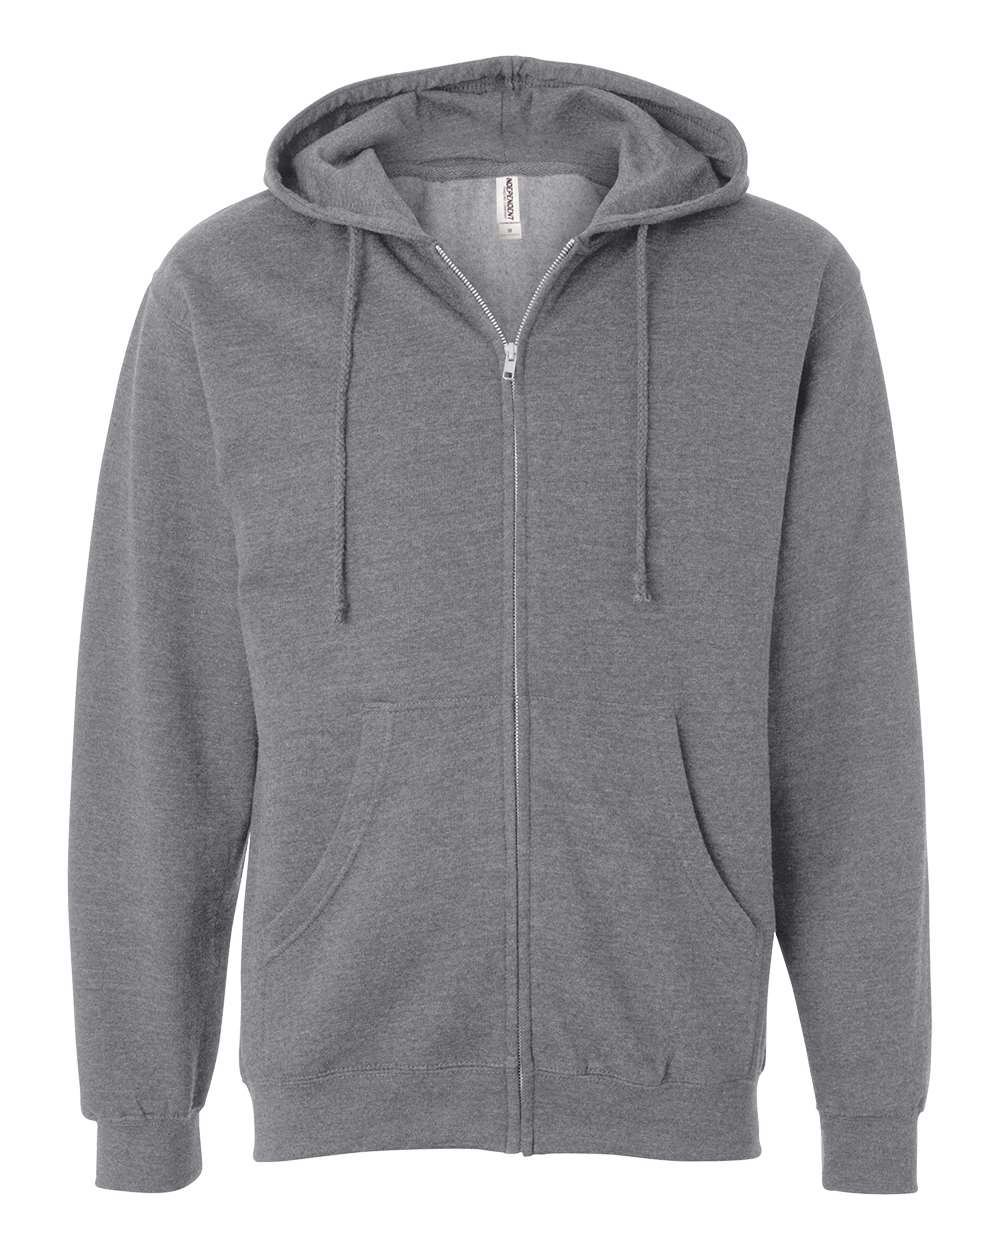 Independent Trading Co. - Midweight Full-Zip Hooded Sweatshirt - SS4500Z. XS - 3XL